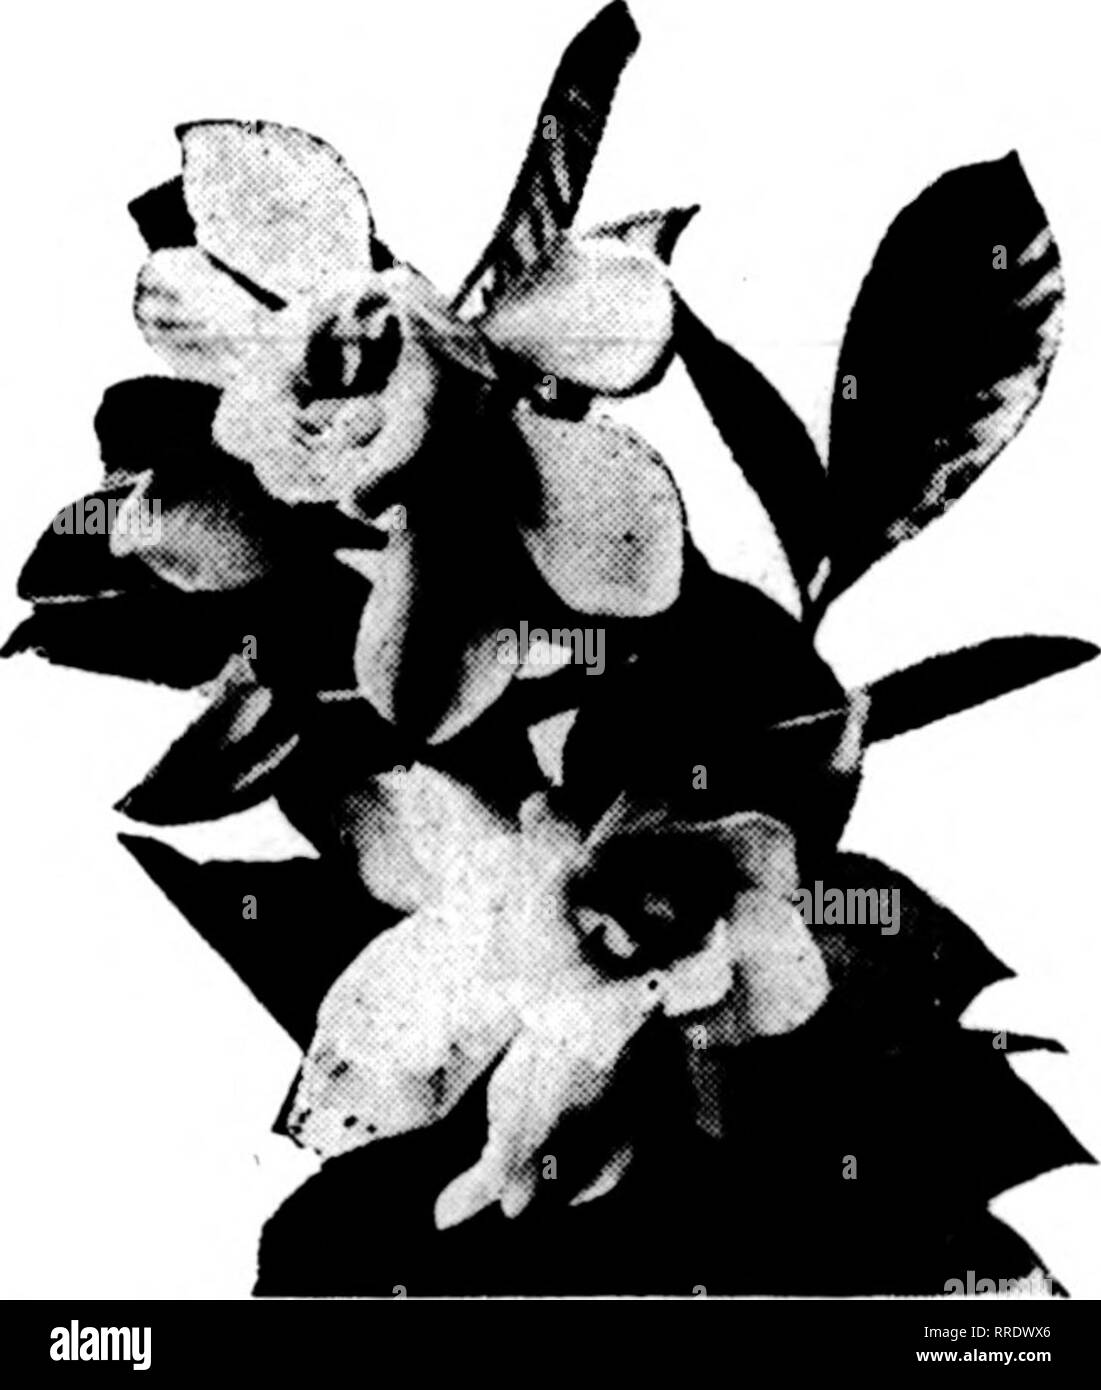 . Florists' review [microform]. Floriculture. ,,, ^ CAPE JASMINES #'»»^'m. ^^' GRANDIFLORA-THE QUEEN OF FLOWERS Welfare now shipping and will continue to ship to June 10. Ordei-s for Decoration Day should be sent in as early as possible. Our buds are fine with plenty of foliage: Short Stems, 4 to 8 inches, per 1000 ^12.00 Medium Stems, 8 to 12 inches, per 1000 18.00 Medium Stems, 8 to 12 inches, per 100 2.00 Jtj ^i^^^^K^ jya.% Stems, 12 to 18 inches, per 1000 25.00 /I. &quot;M J^K^^^^^ Long Stems, 12 to 18 inches, per 100 3.00 50 buds, prepaid, for $1.75 We ship C. 0. D. to responsible partie Stock Photo